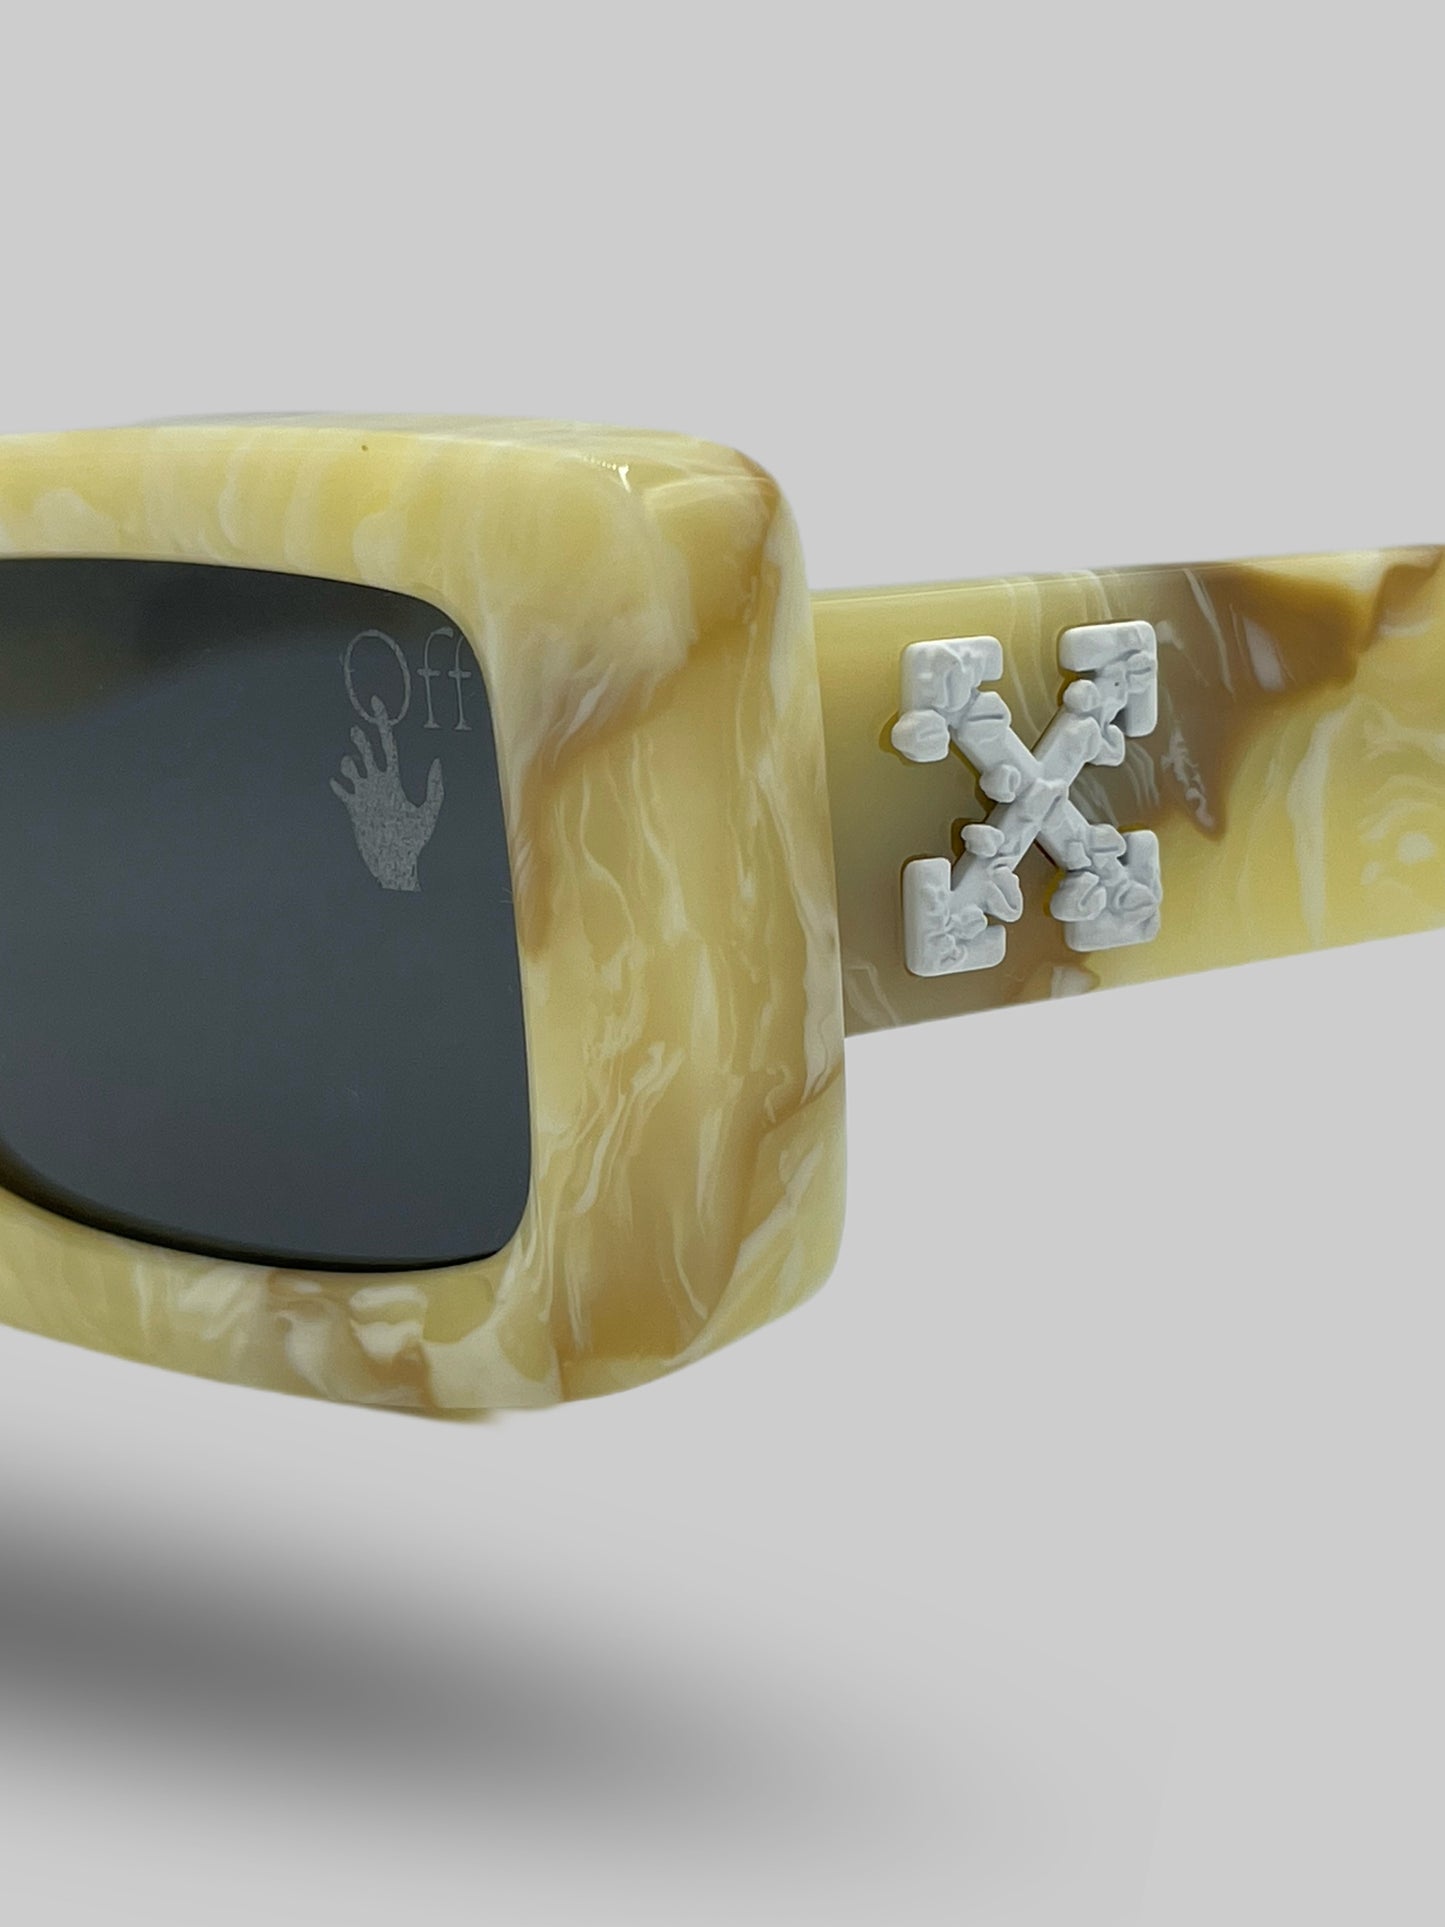 OFF-WHITE Athur Square Frame Sunglasses Yellow Marble